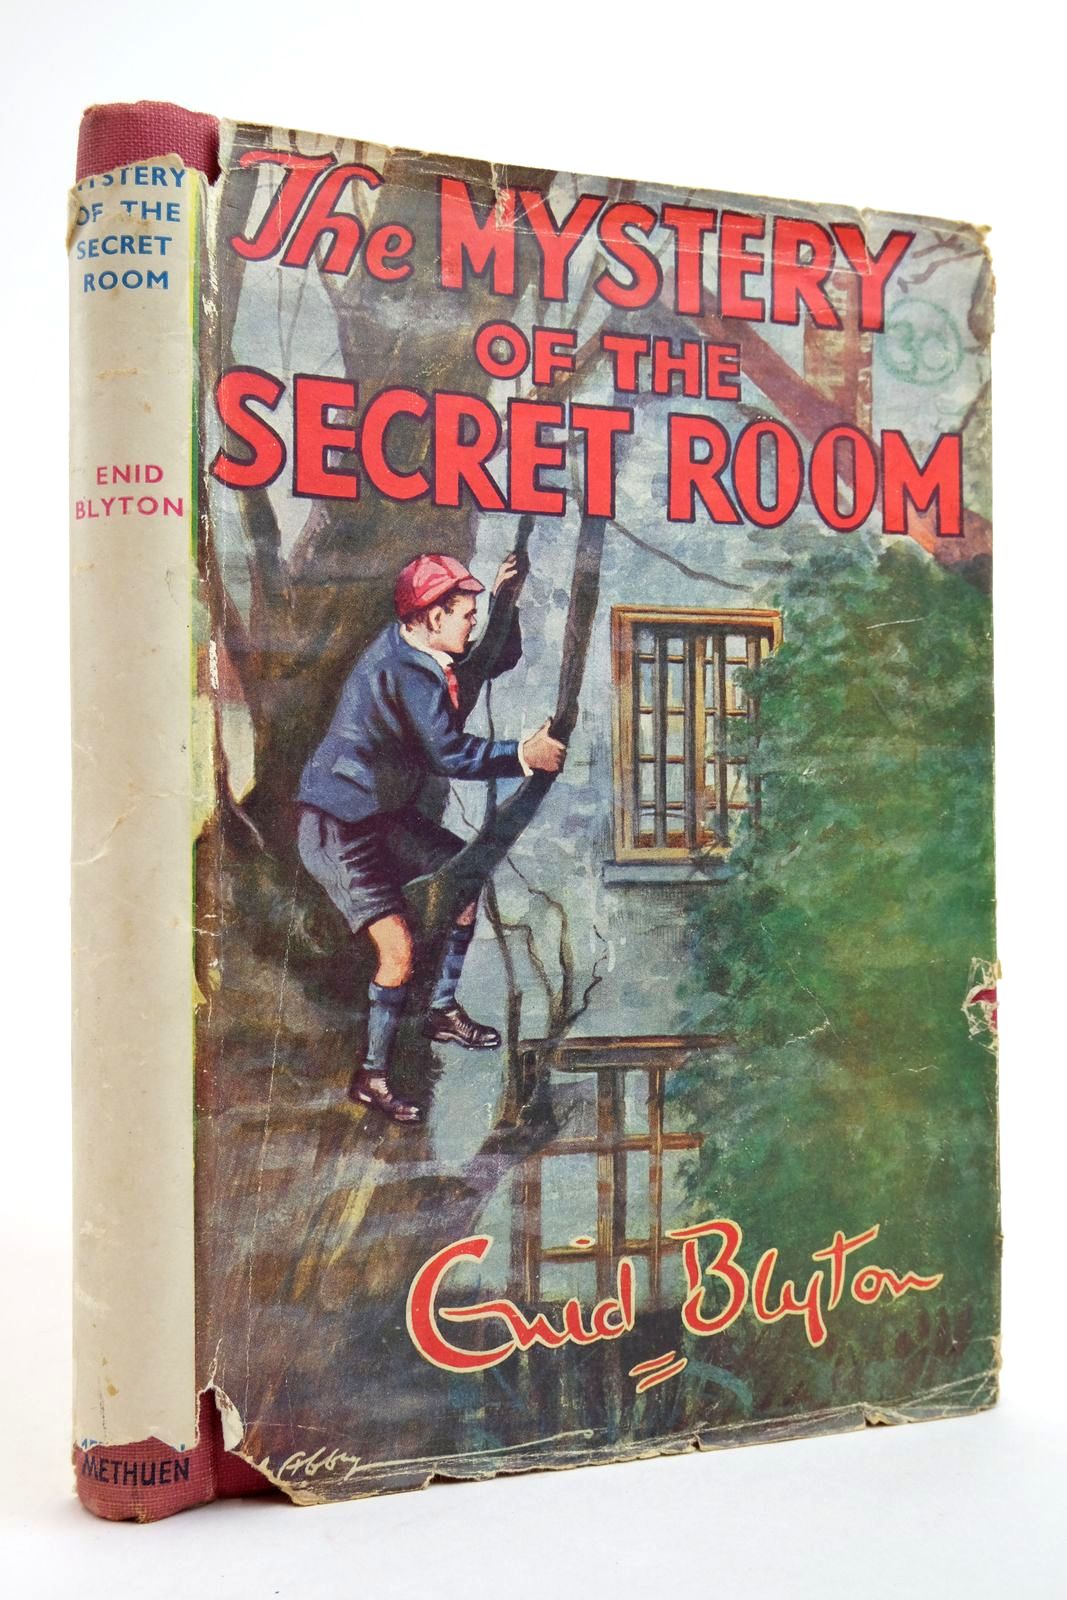 Photo of THE MYSTERY OF THE SECRET ROOM written by Blyton, Enid illustrated by Abbey, J. published by Methuen & Co. Ltd. (STOCK CODE: 2135615)  for sale by Stella & Rose's Books